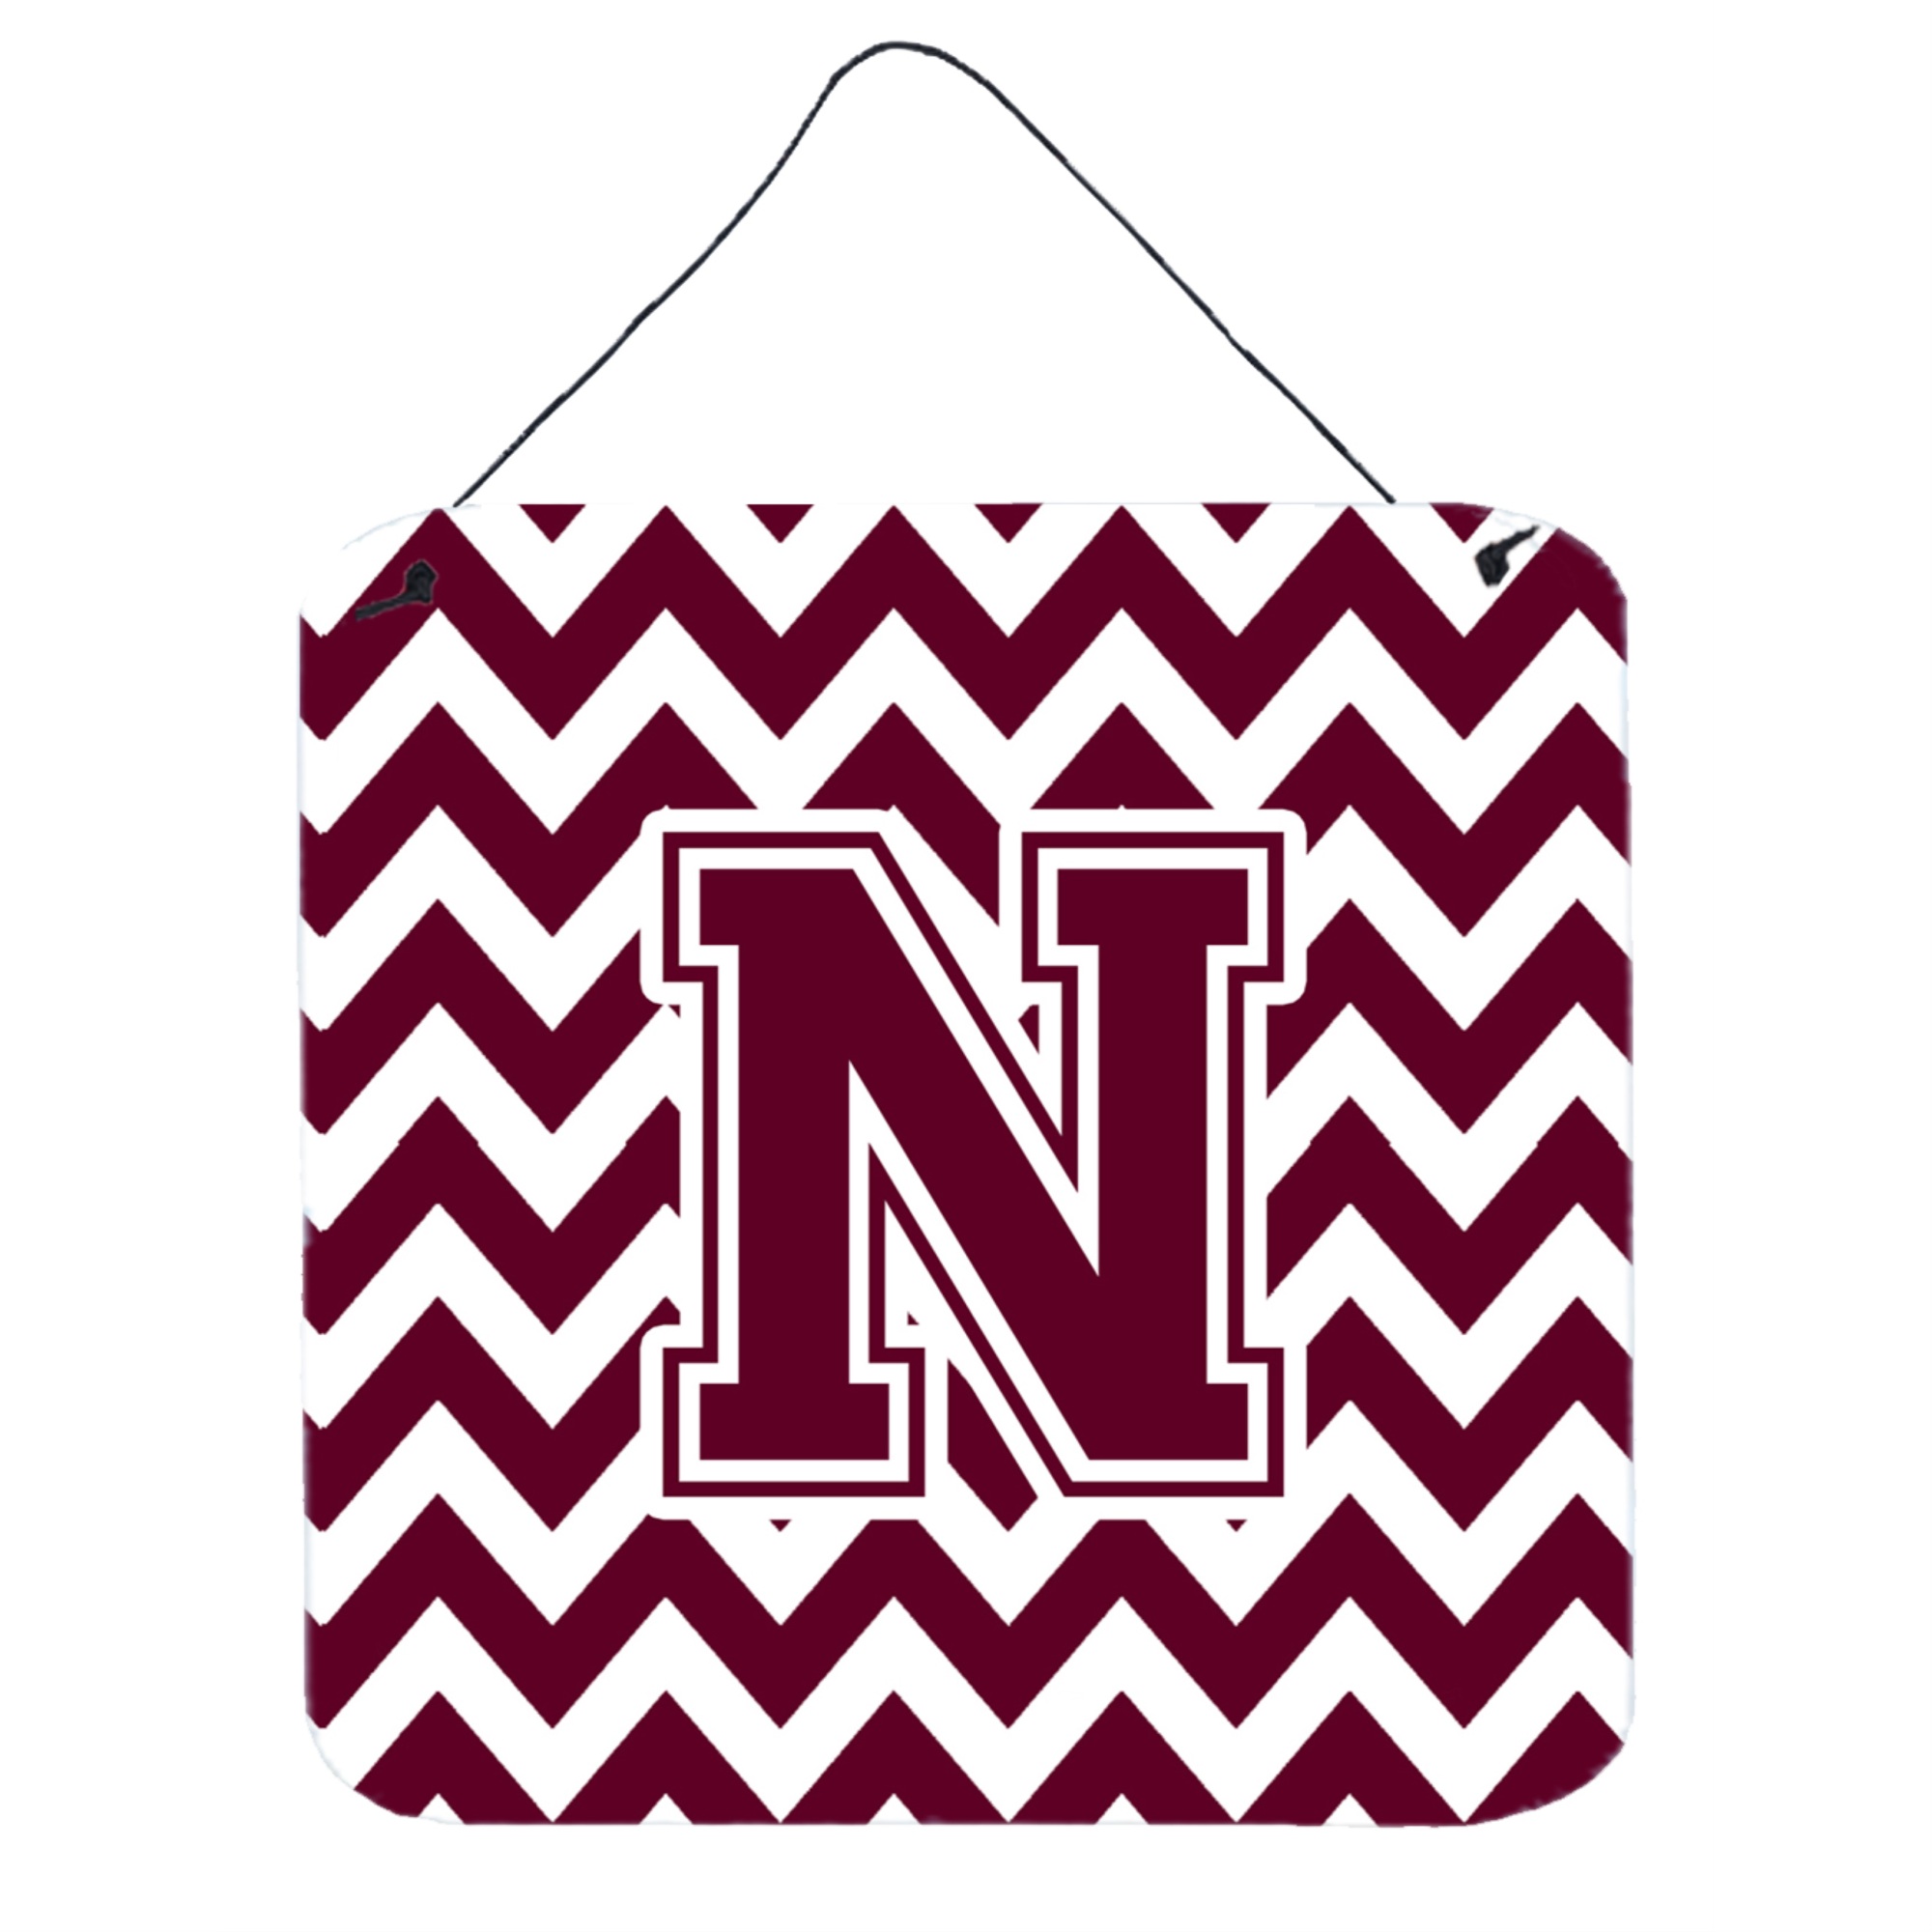 Caroline's Treasures "Caroline's Treasures Letter N Wall or Door Hanging Prints CJ1051-NDS66, 6"" H x 6"" W, Chevron - White and Maroon"